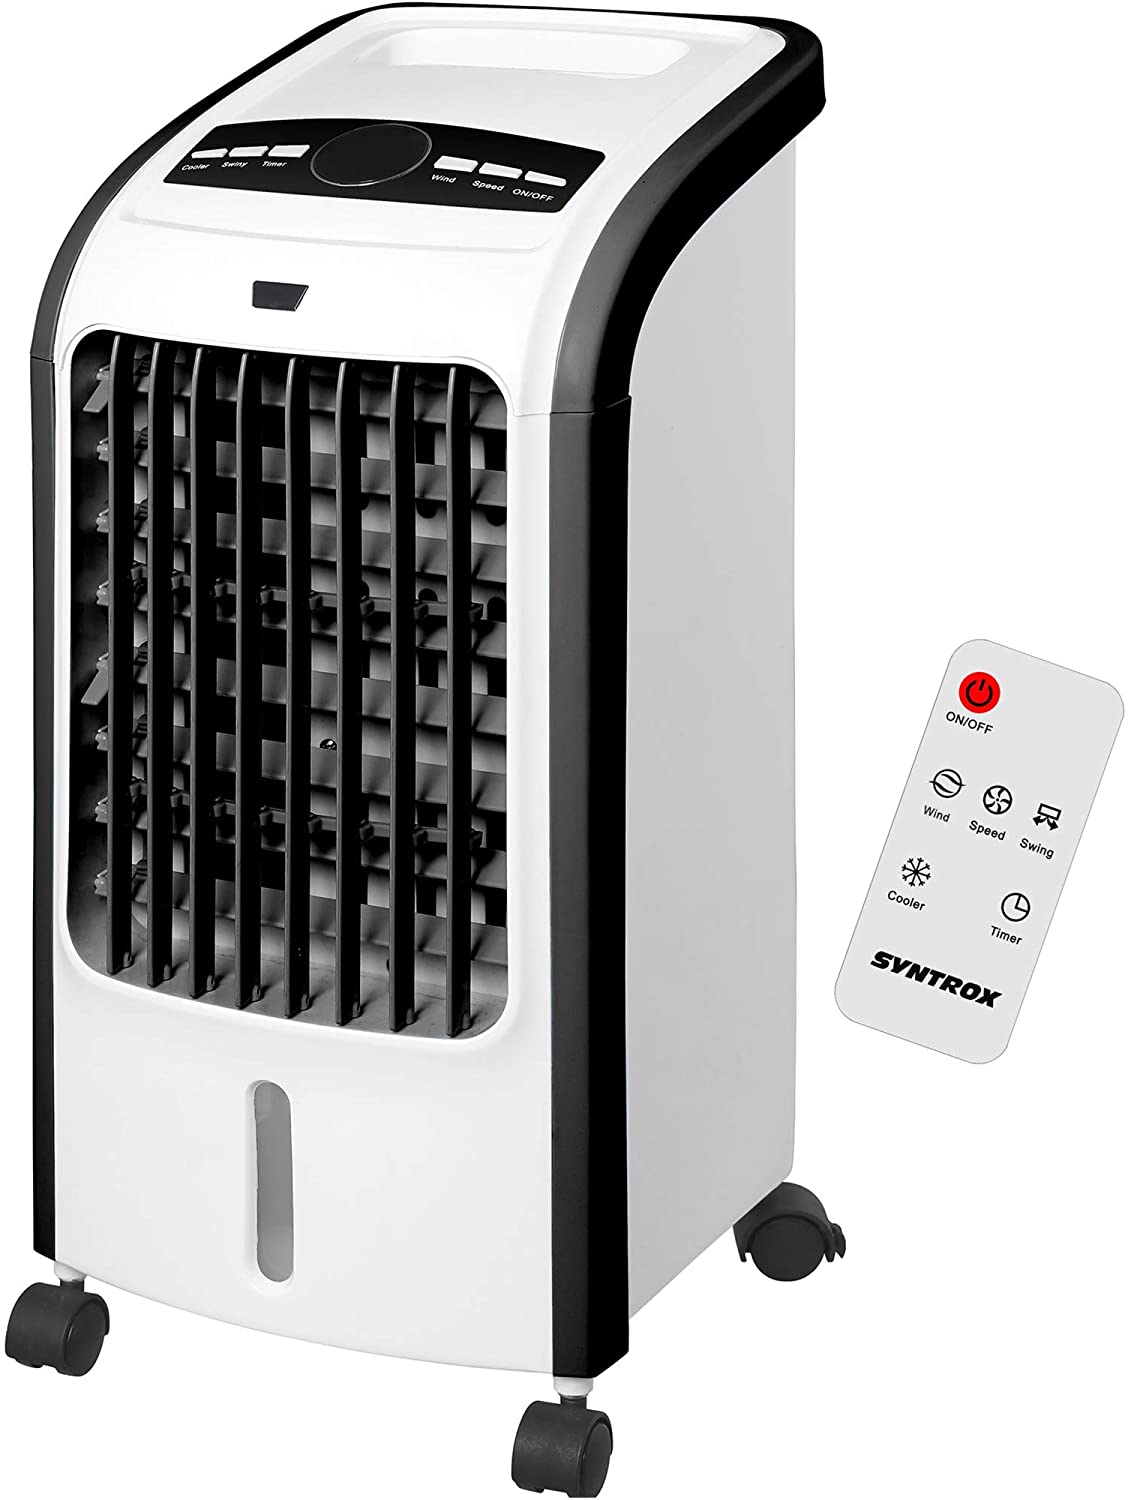 Syntrox Germany 4-in-1 air cooler, humidifier, air freshener and fan with touch panel and remote control, air flow 900 m3/h, AC-80W-4L